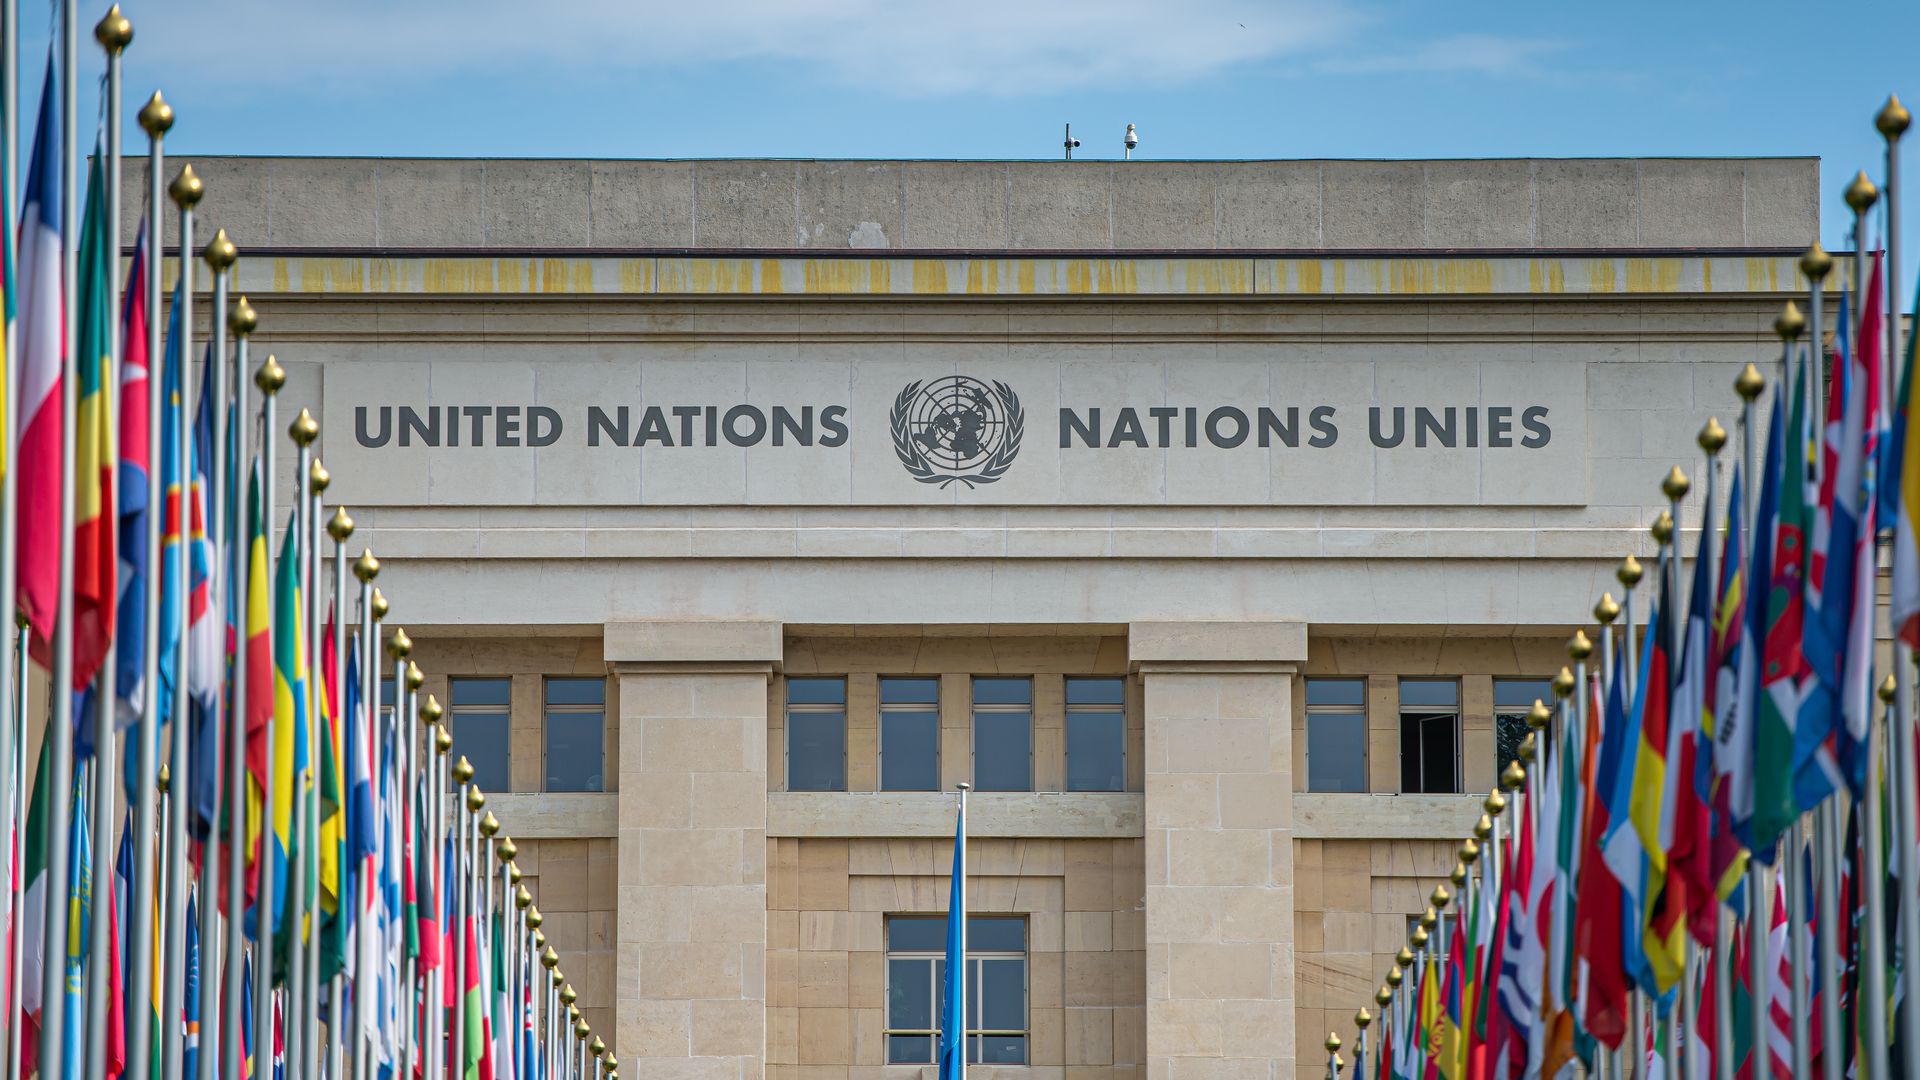 Flags stand outside the United Nations (UN) building in Geneva, Switzerland.